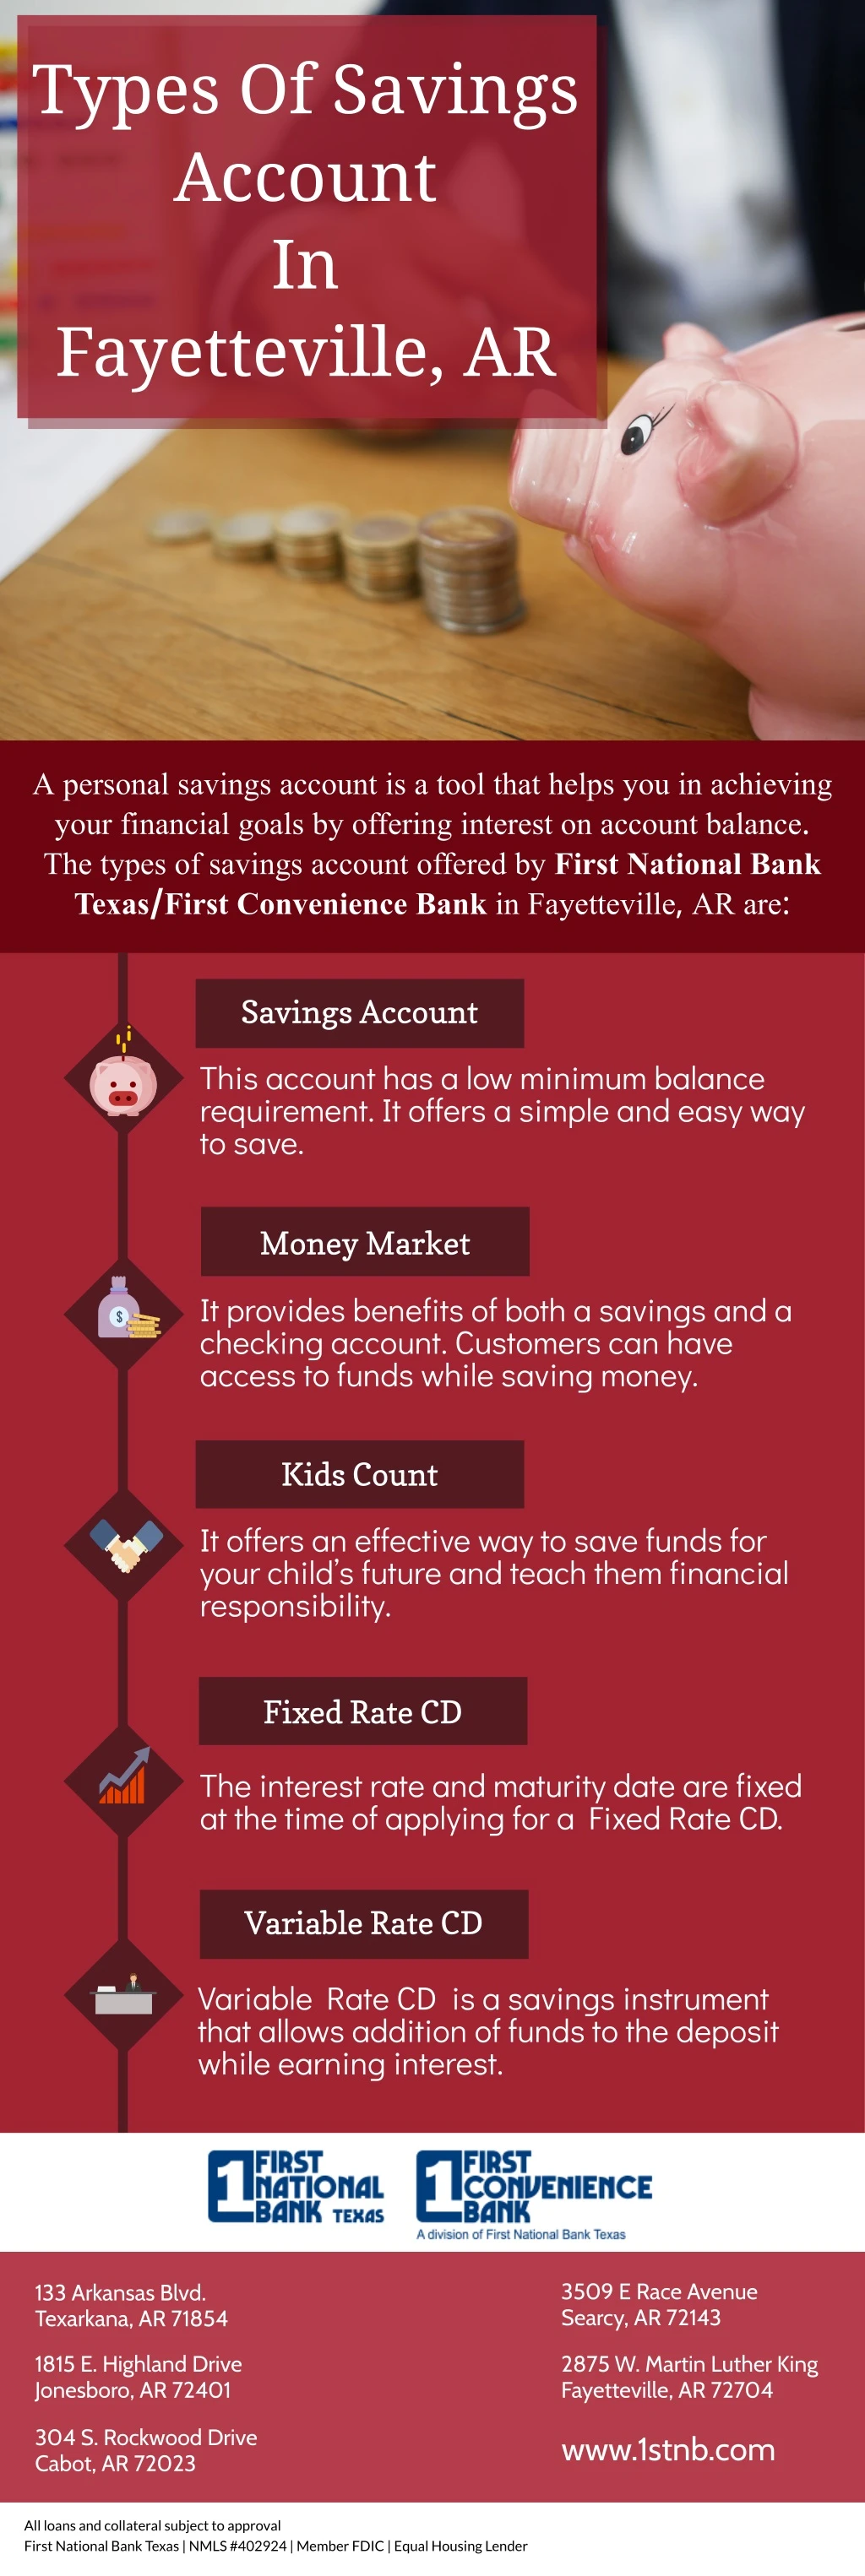 types of savings account in fayetteville ar